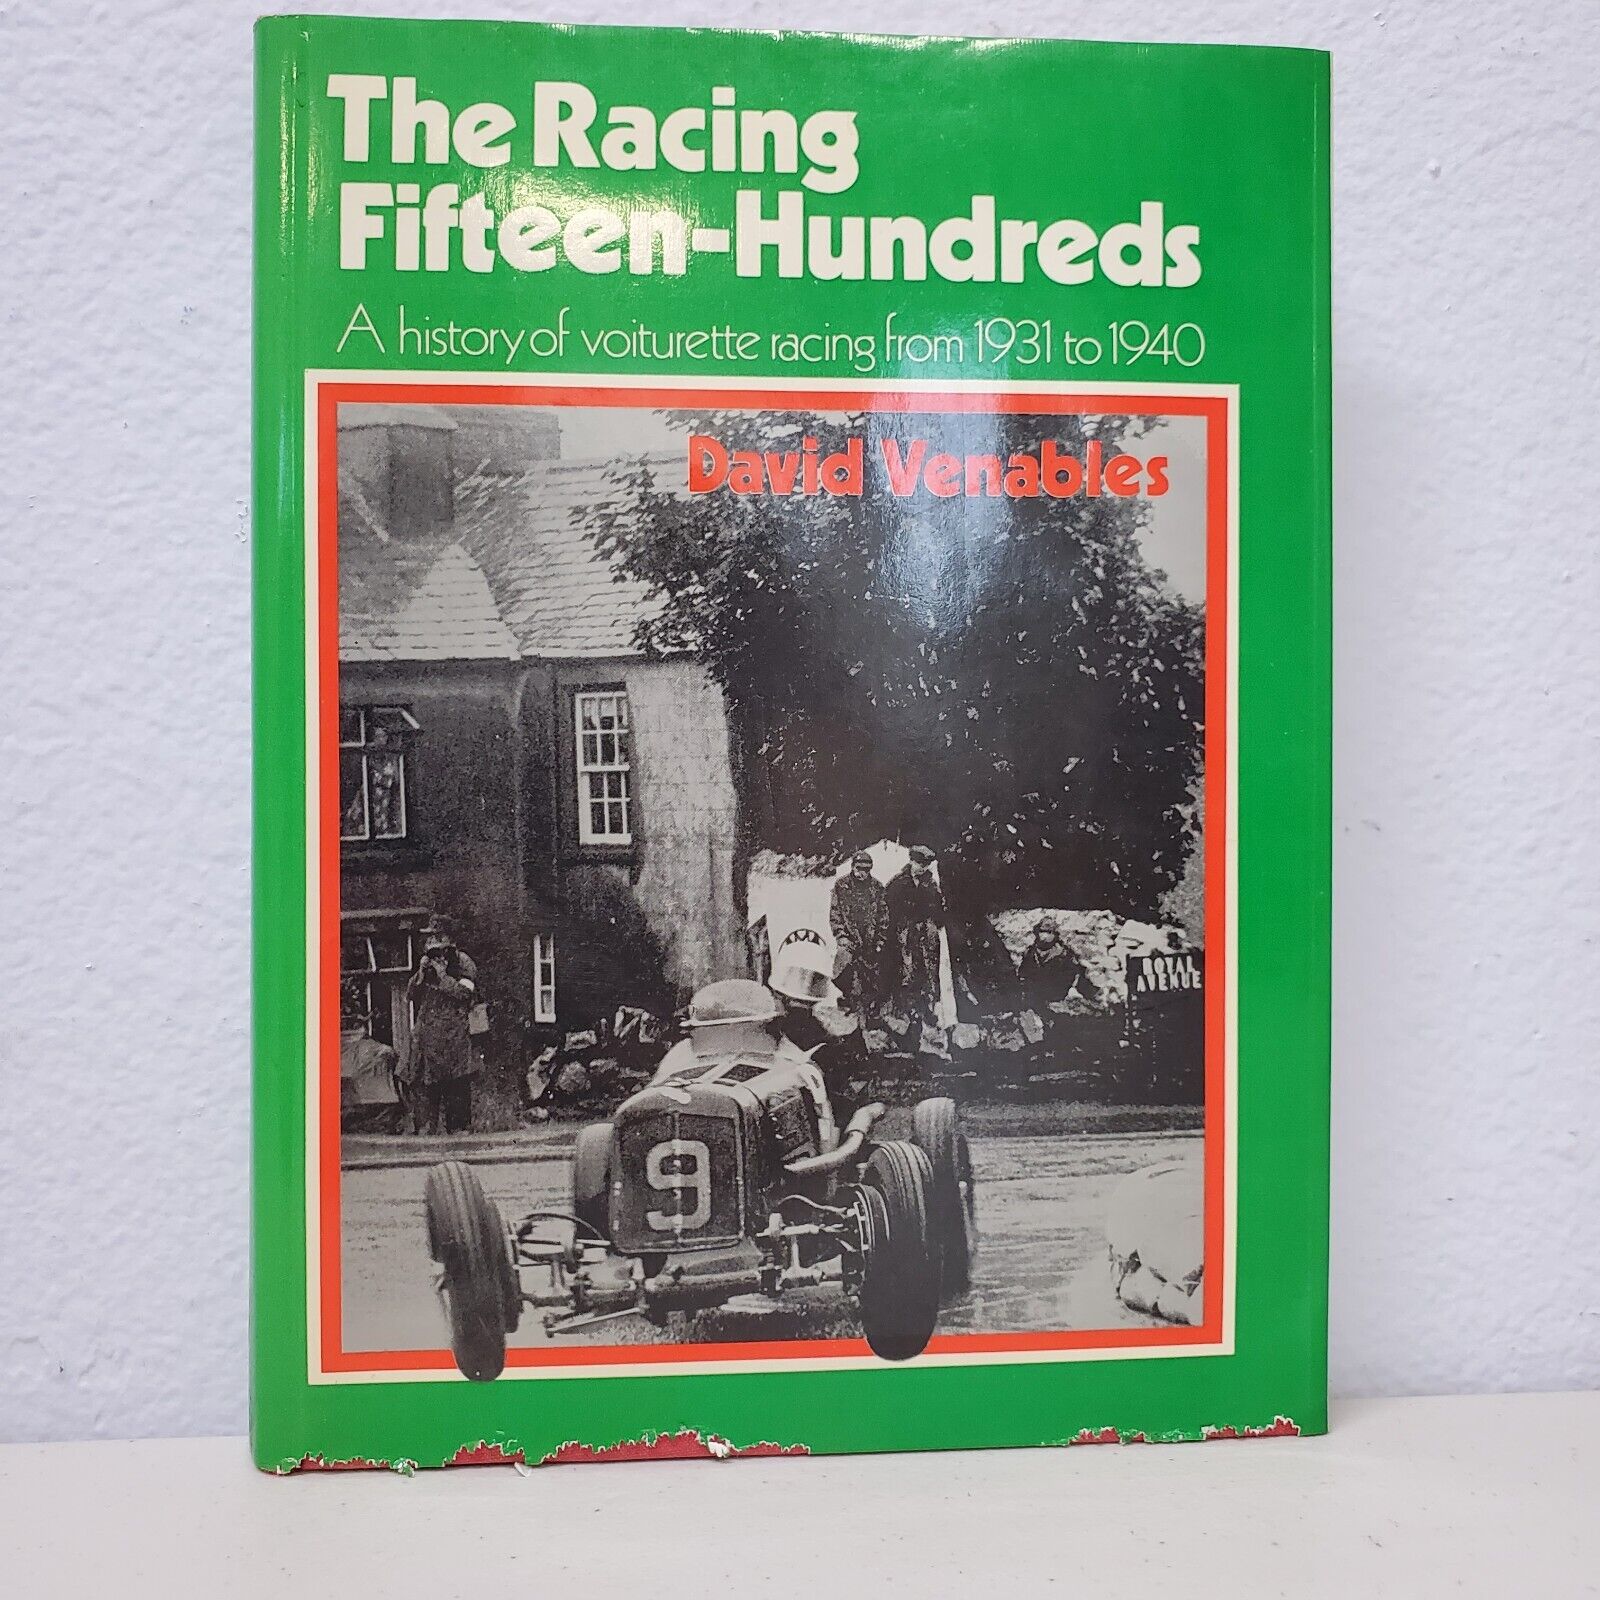 The Racing Fifteen-Hundreds A history of voiturette racing from 1931 to 1940